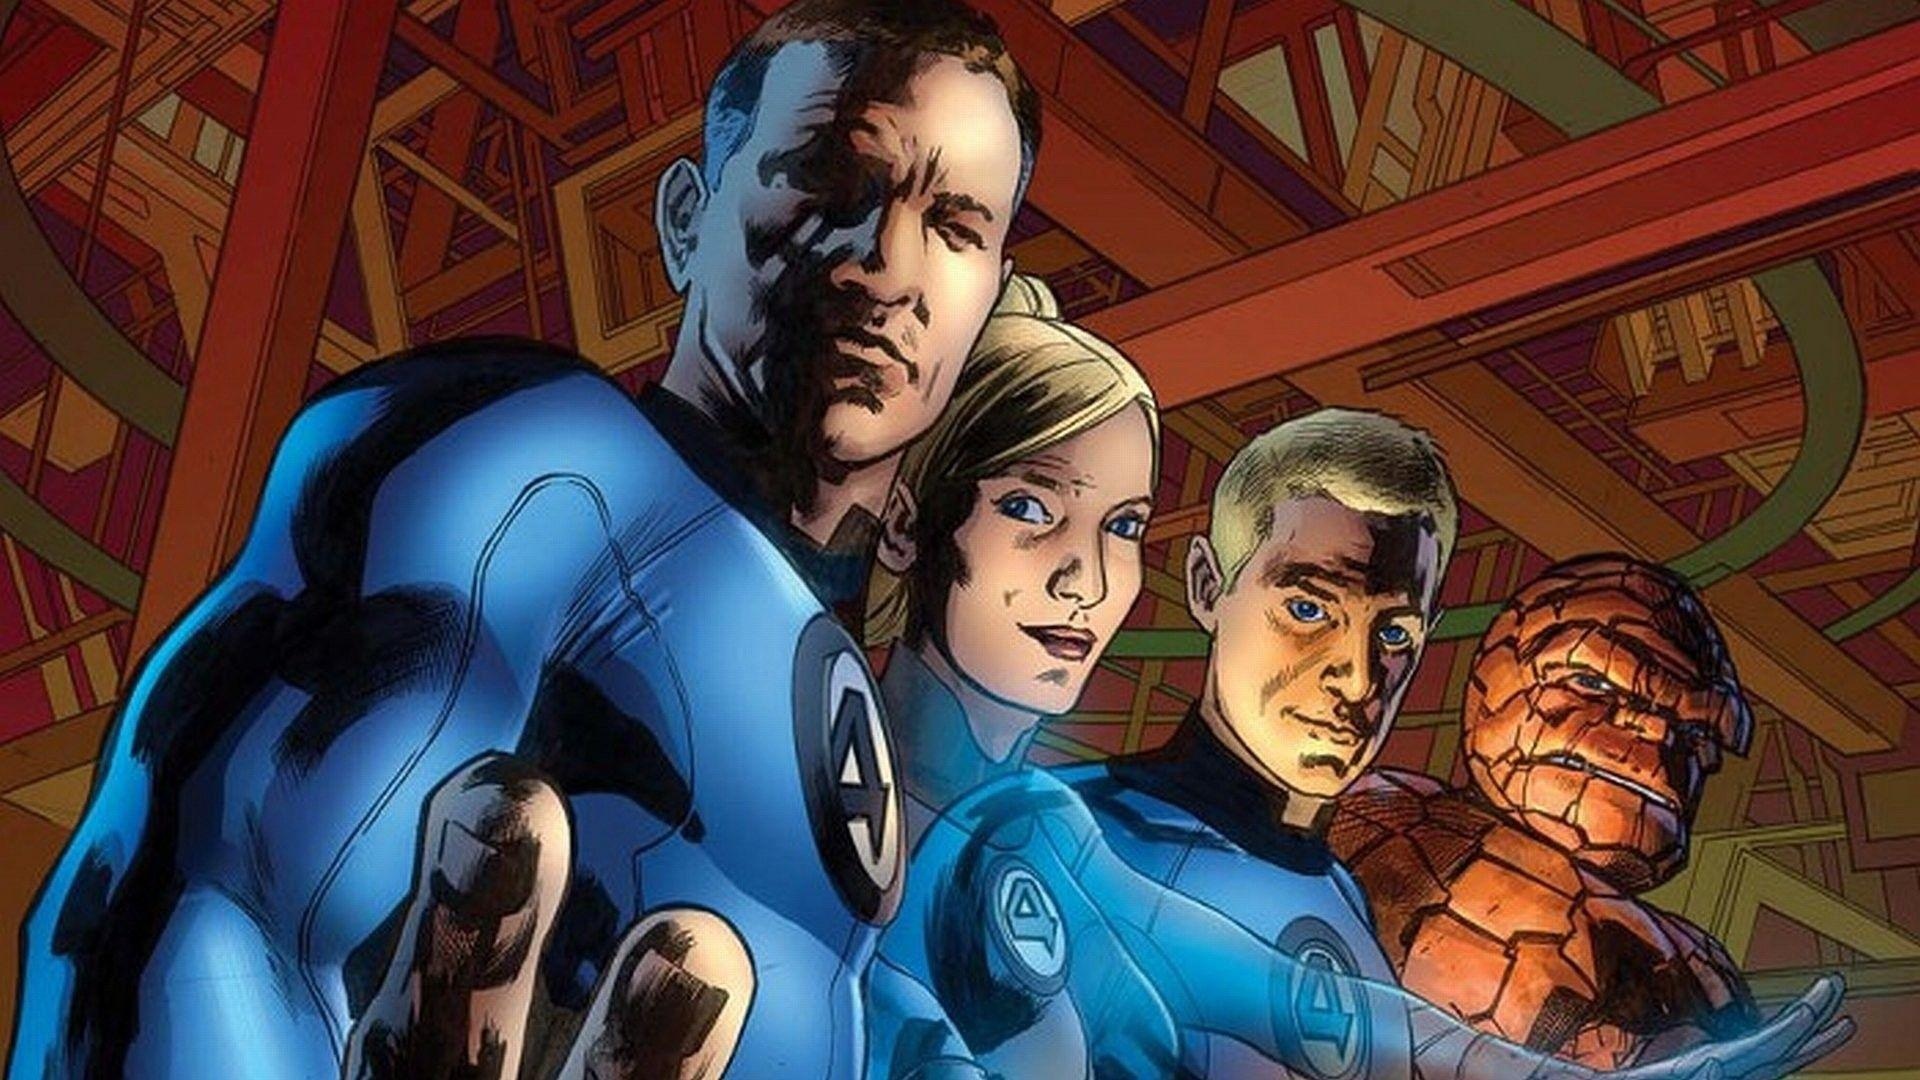 Mister Fantastic pictures, Human stretch, Invisible force fields, Super stretch, 1920x1080 Full HD Desktop